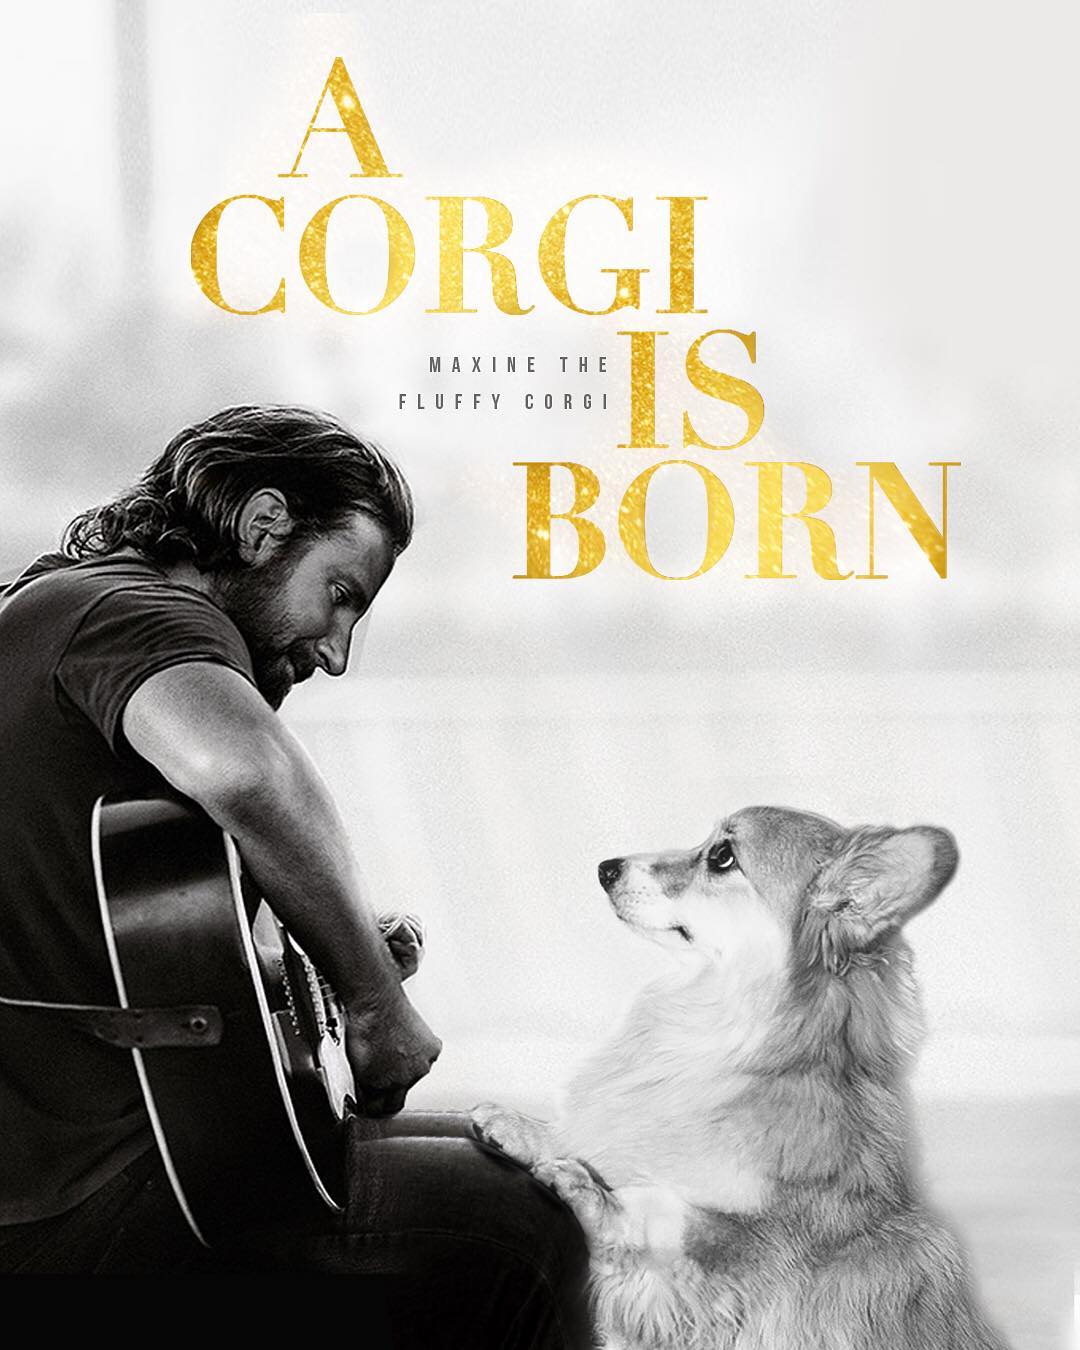 Dog Gets The Star Treatment By Being Photoshopped Into Movie Posters